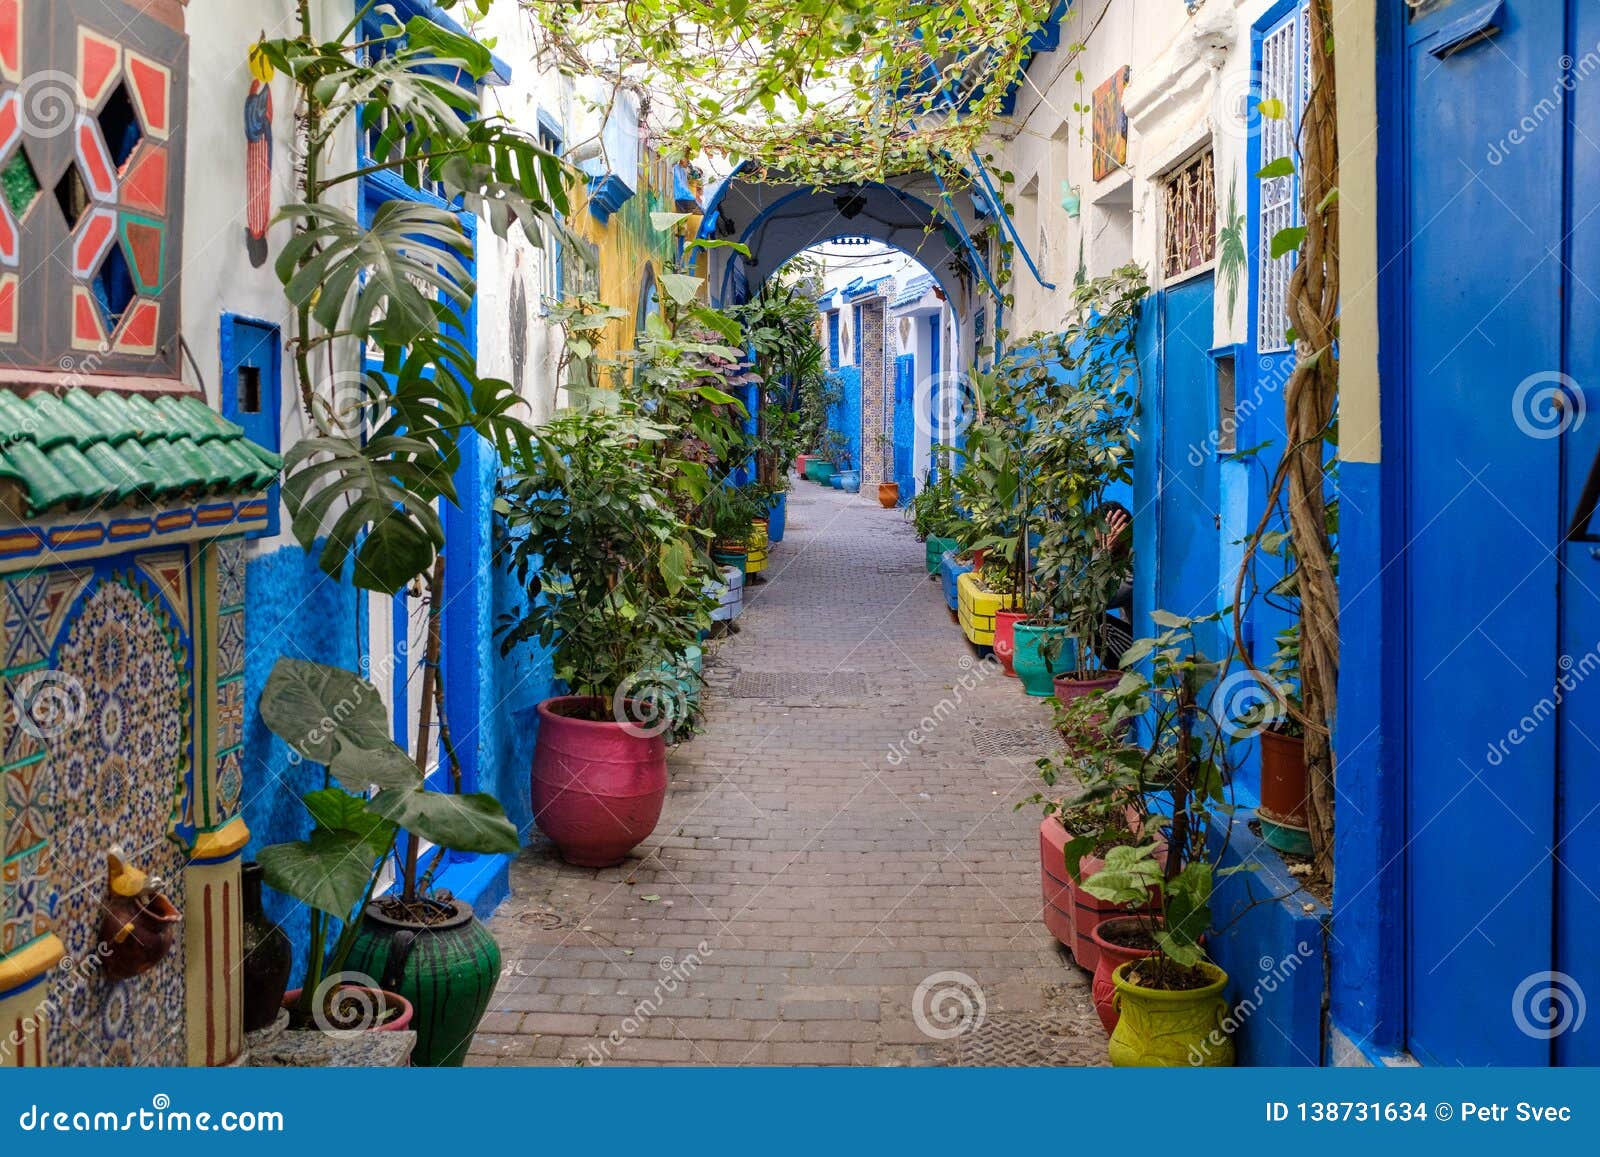 colourful alleys of tangier medina